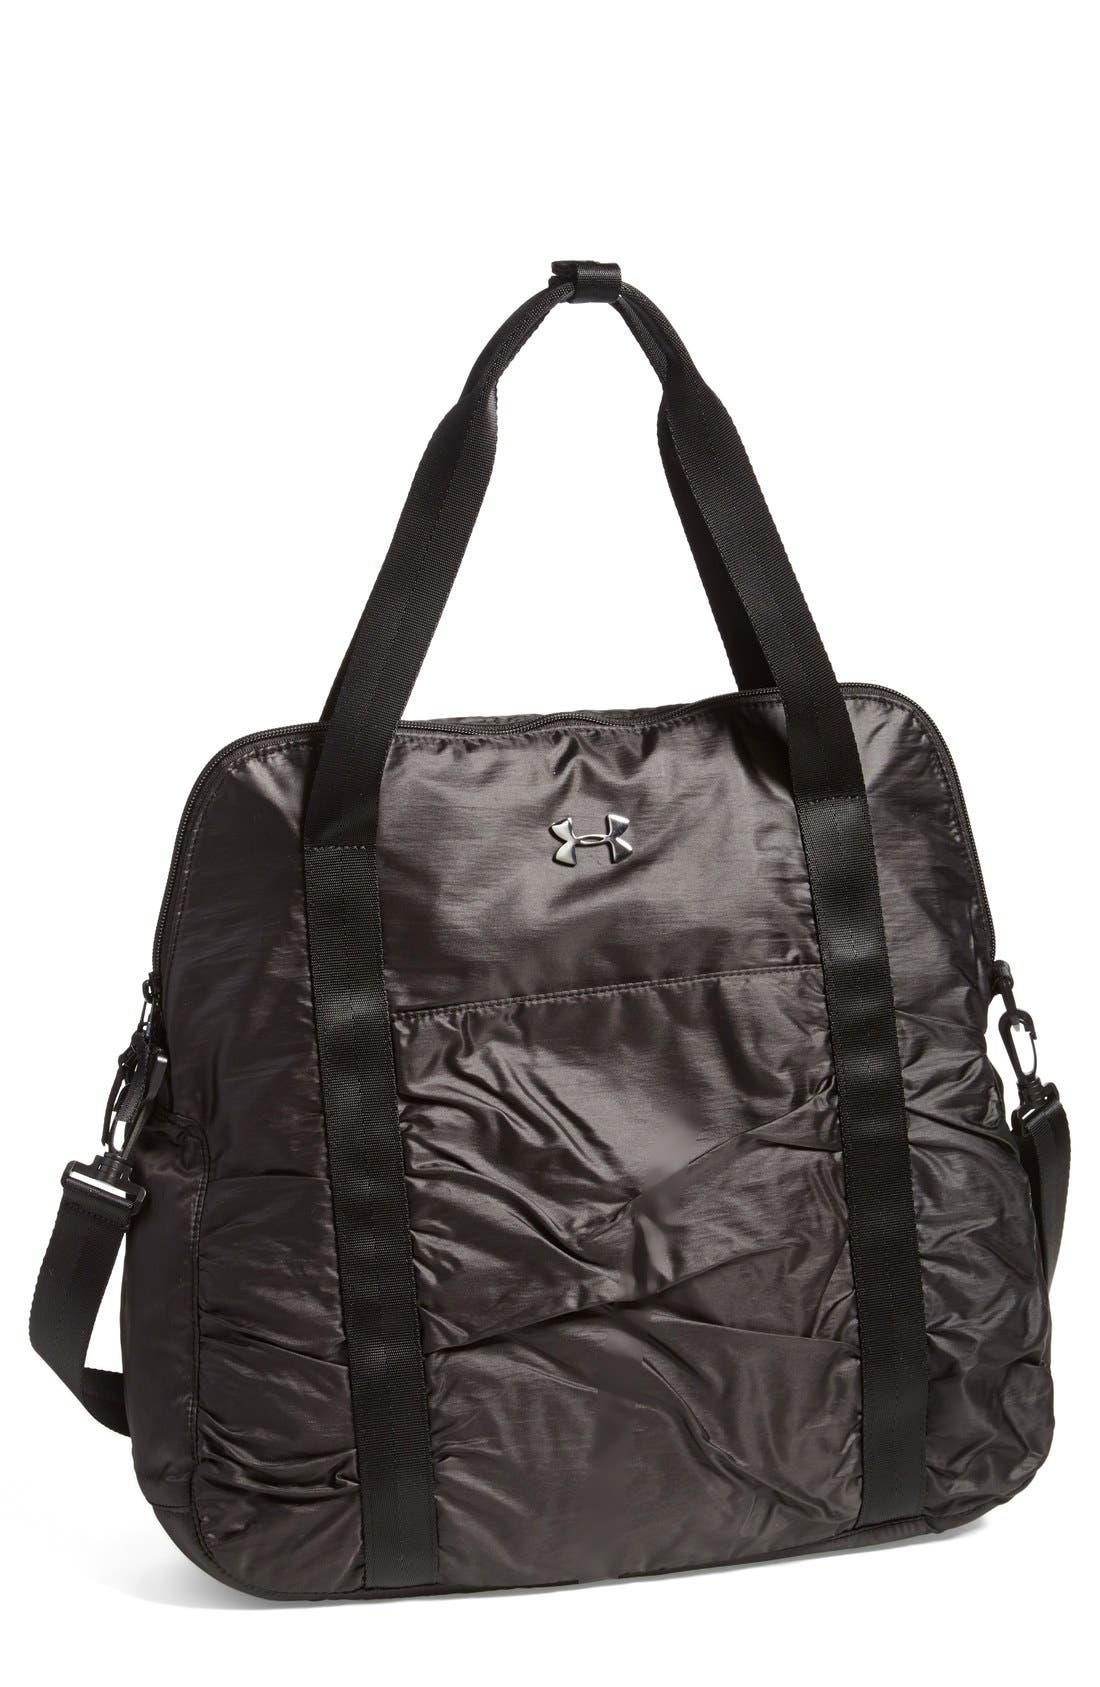 Under Armour 'Gotta Have It' Tote 